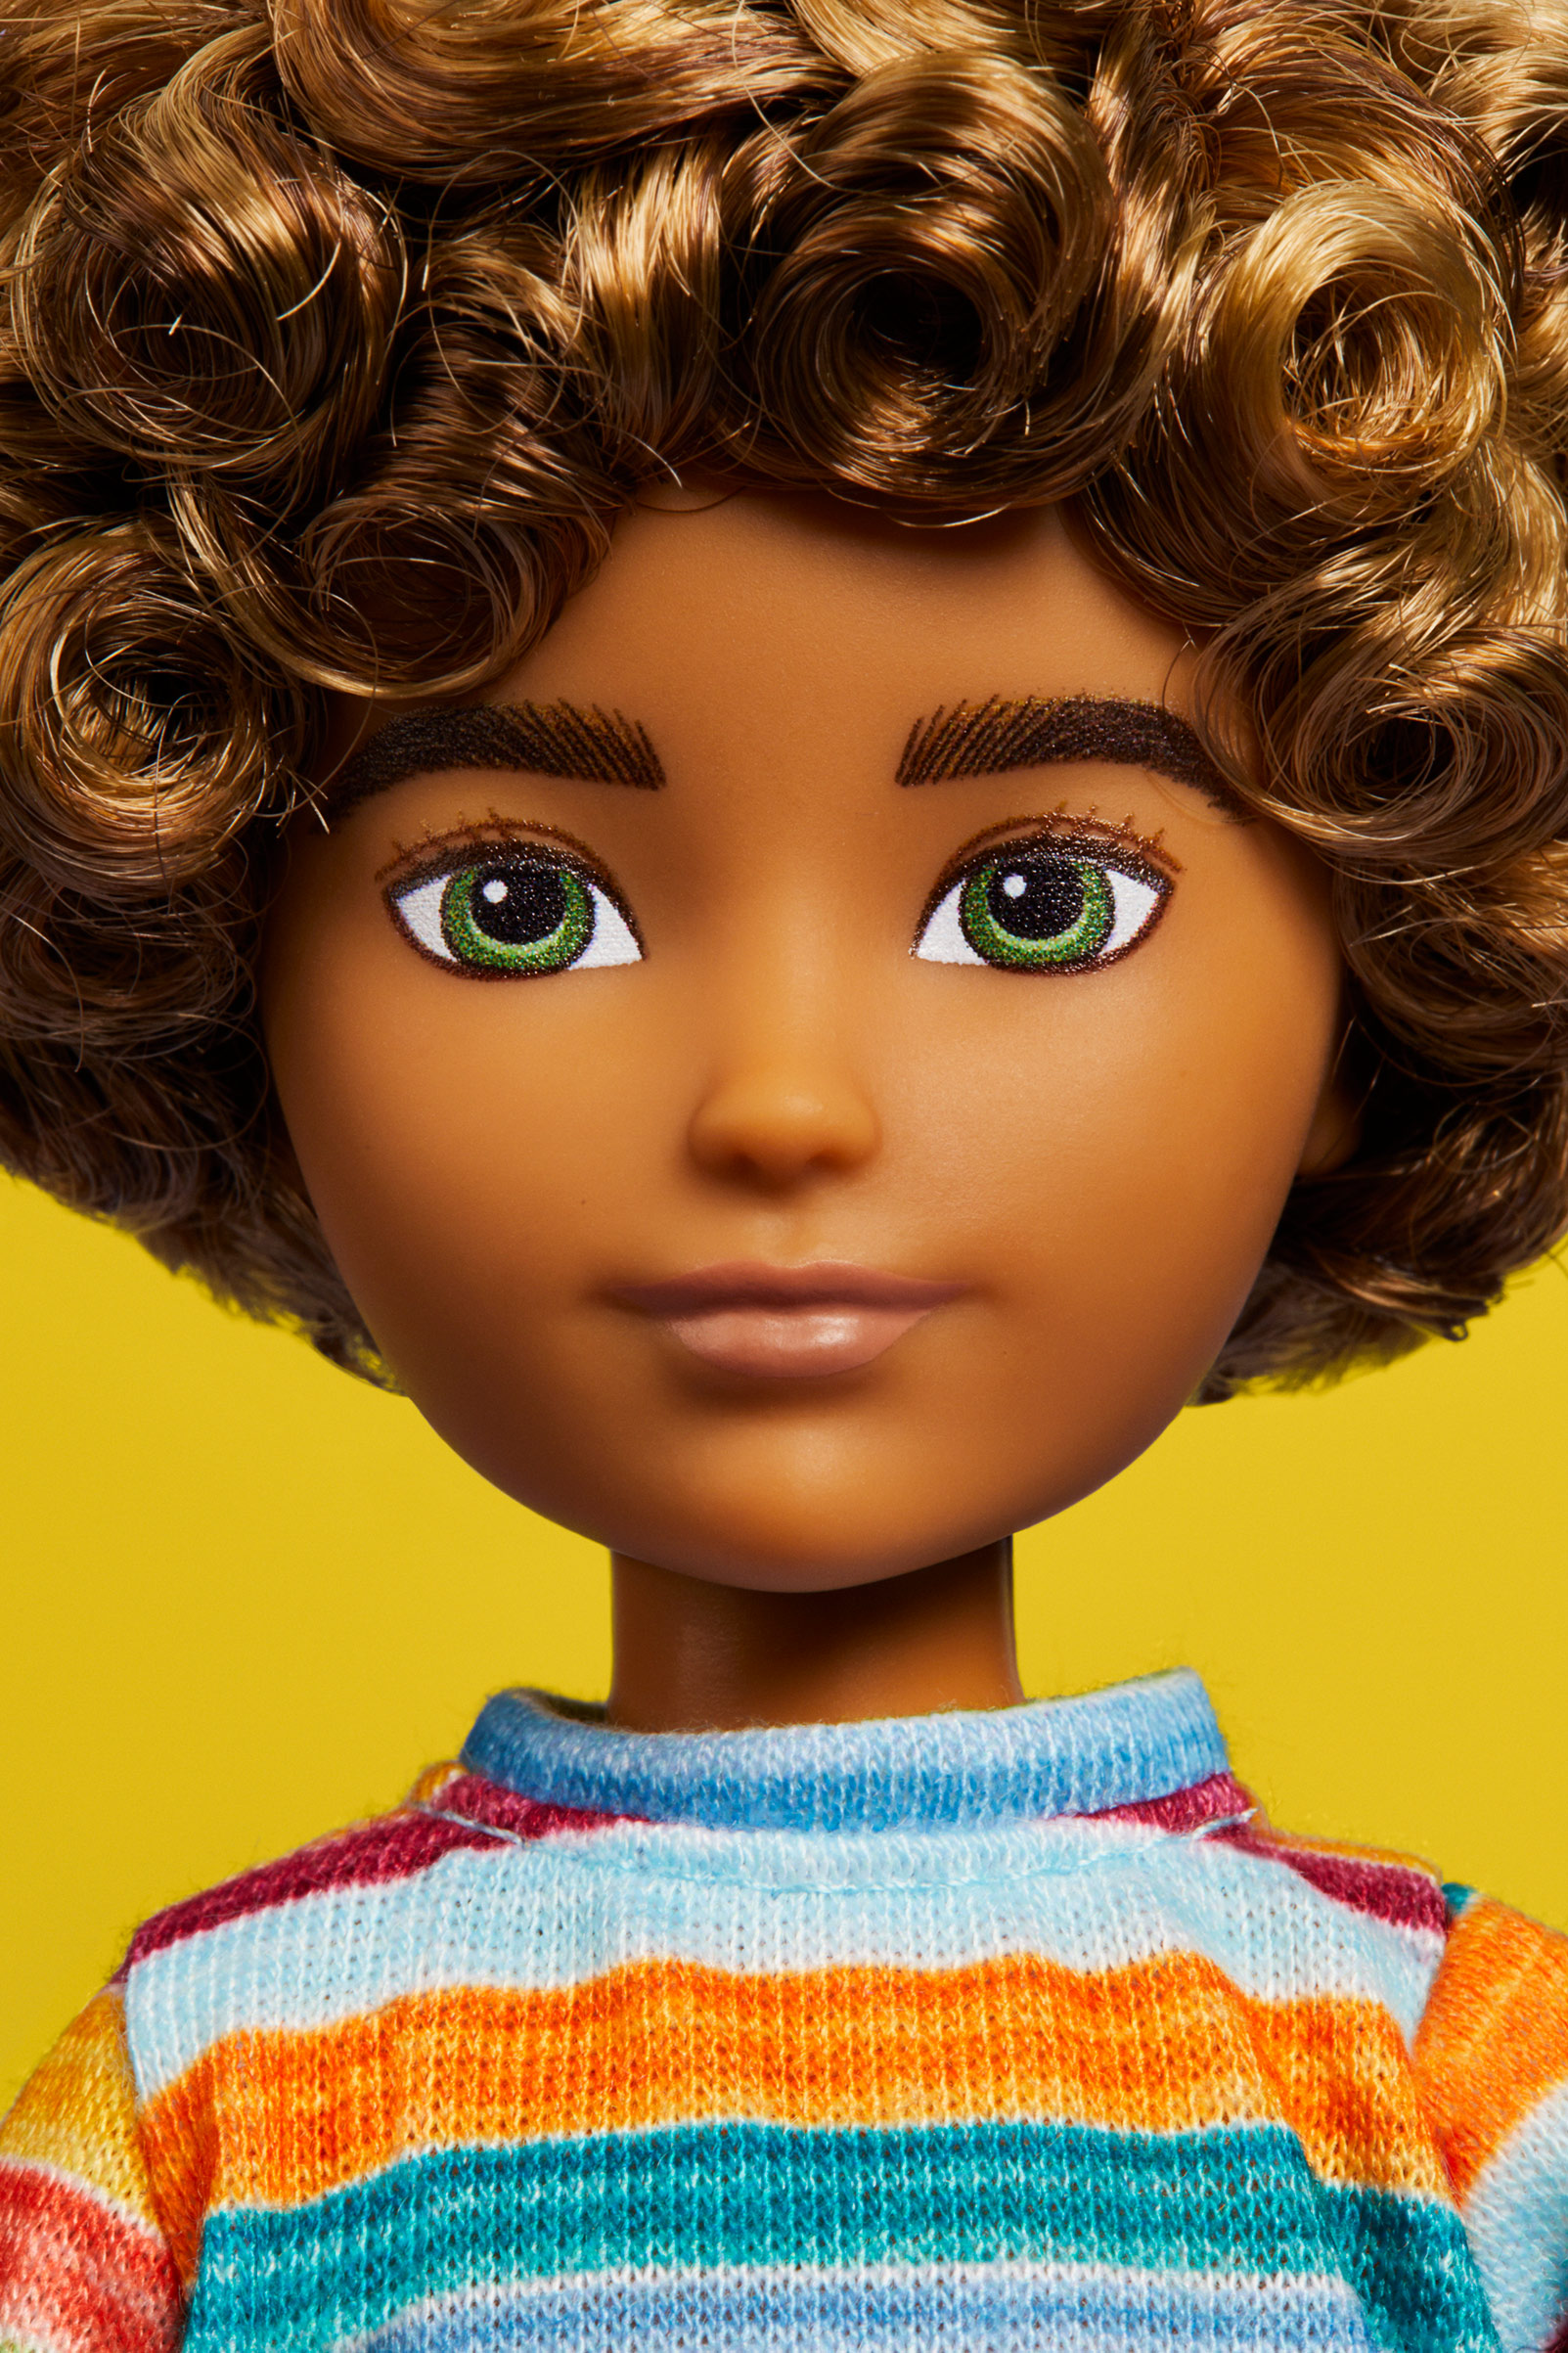 Mattel gender-neutral doll. "It can be a boy, a girl, neither or both," Oct. 7 issue. (JUCO for TIME)